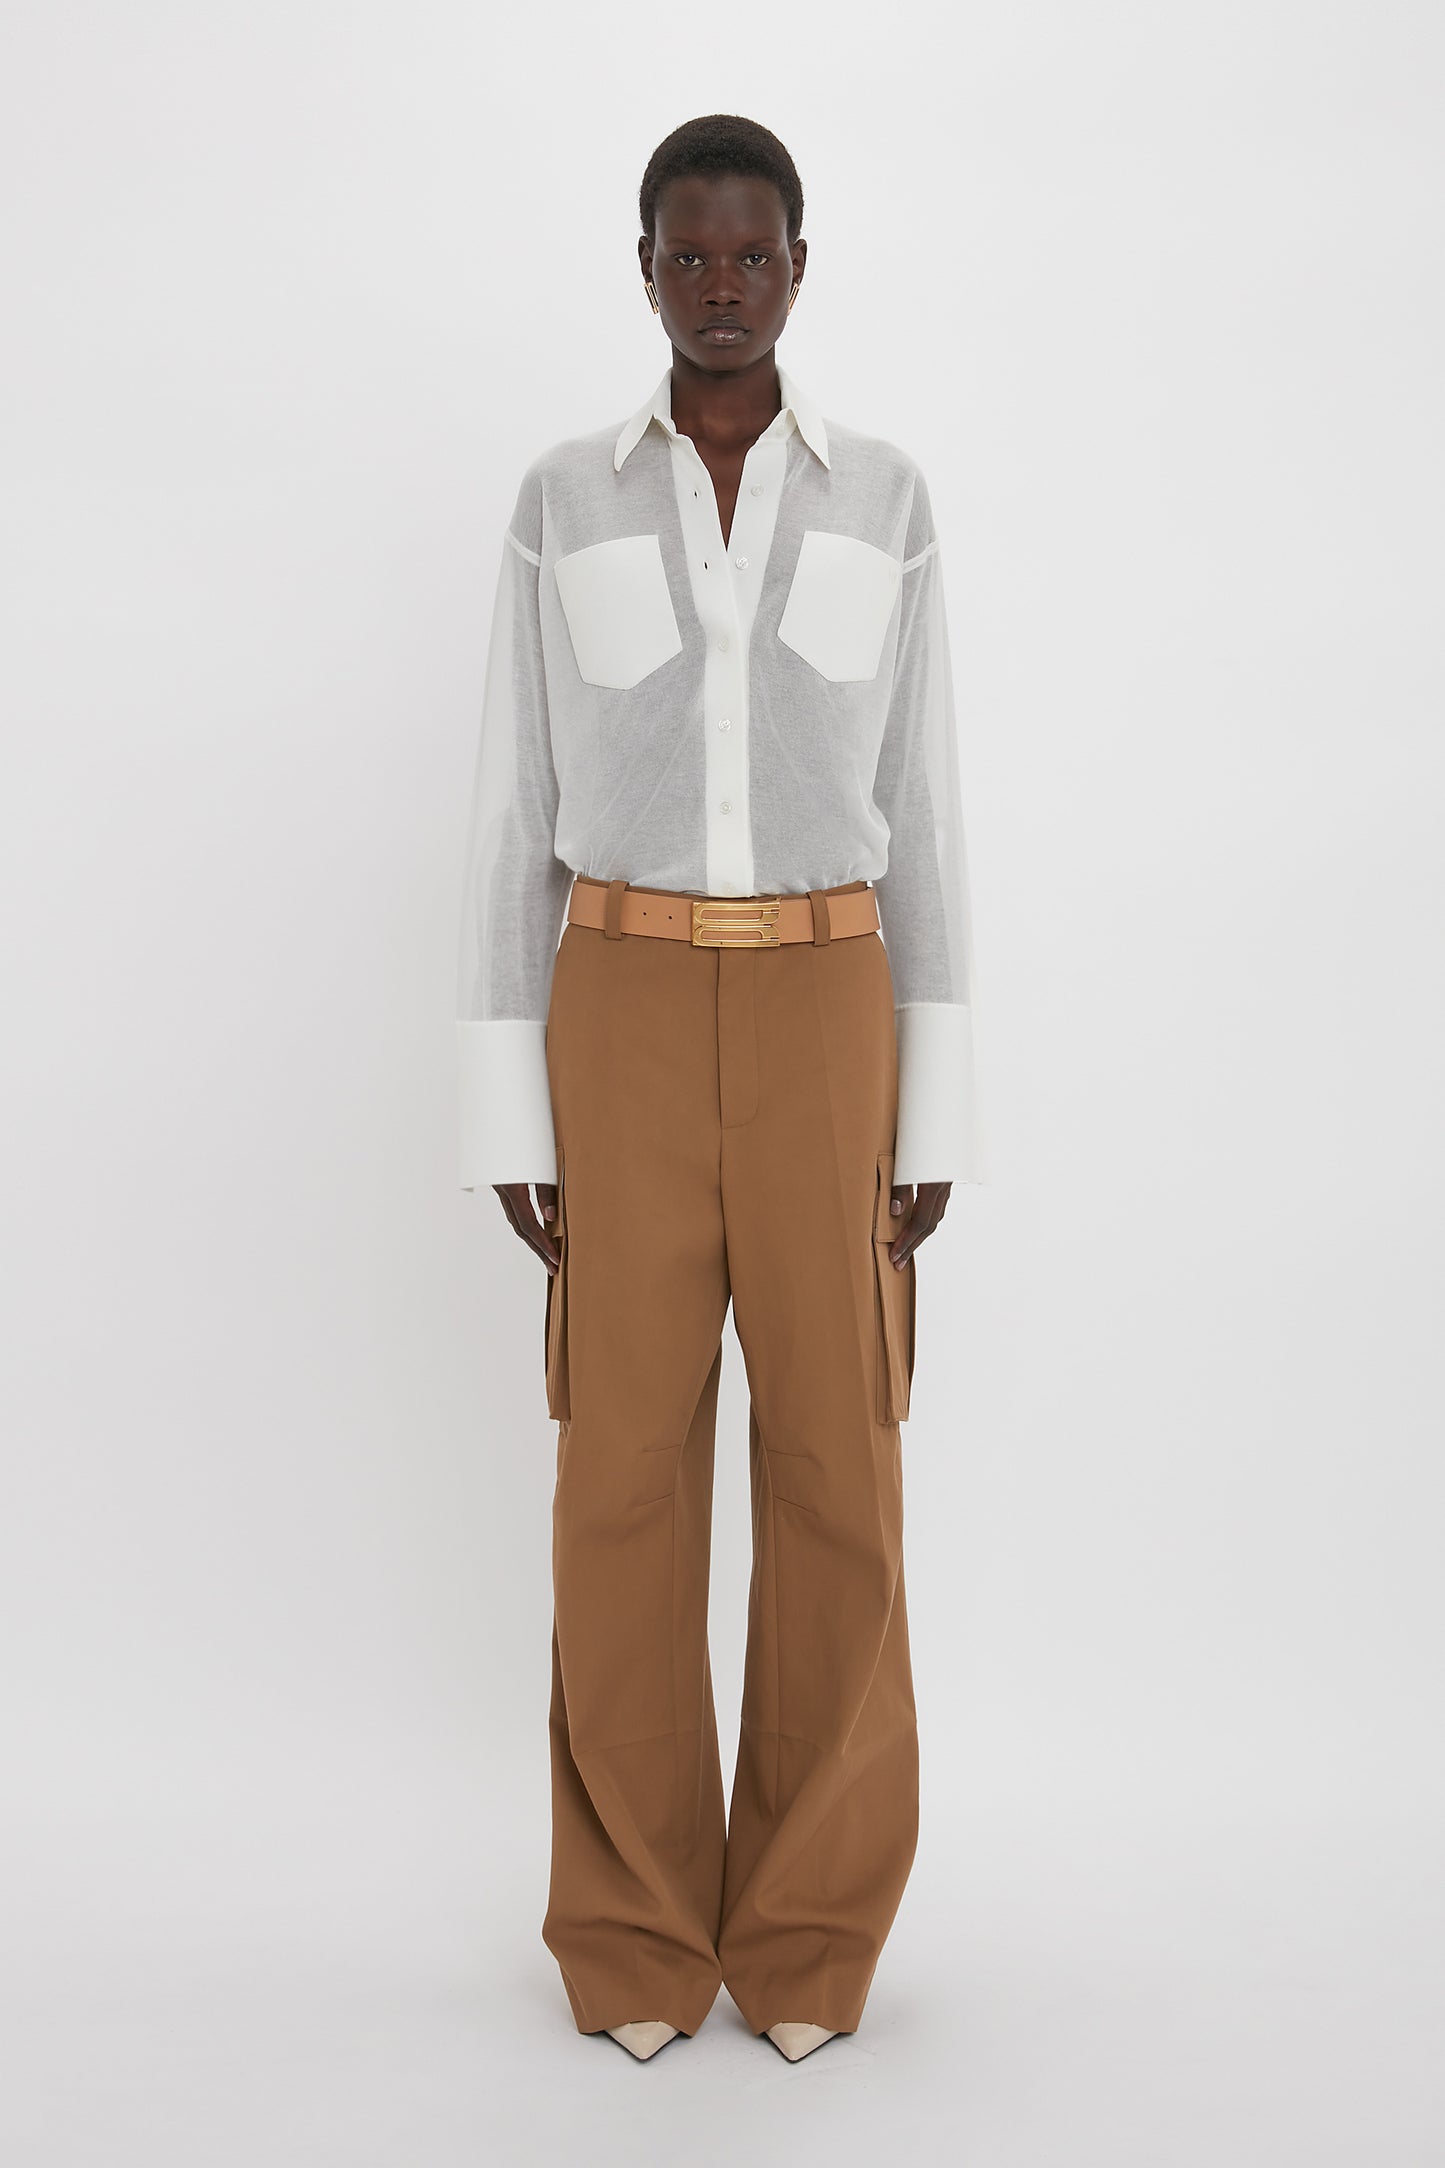 Person standing wearing a white Pocket Detail Shirt In White by Victoria Beckham with front patch pockets and brown high-waisted, wide-leg pants in a relaxed fit. The background is plain white.